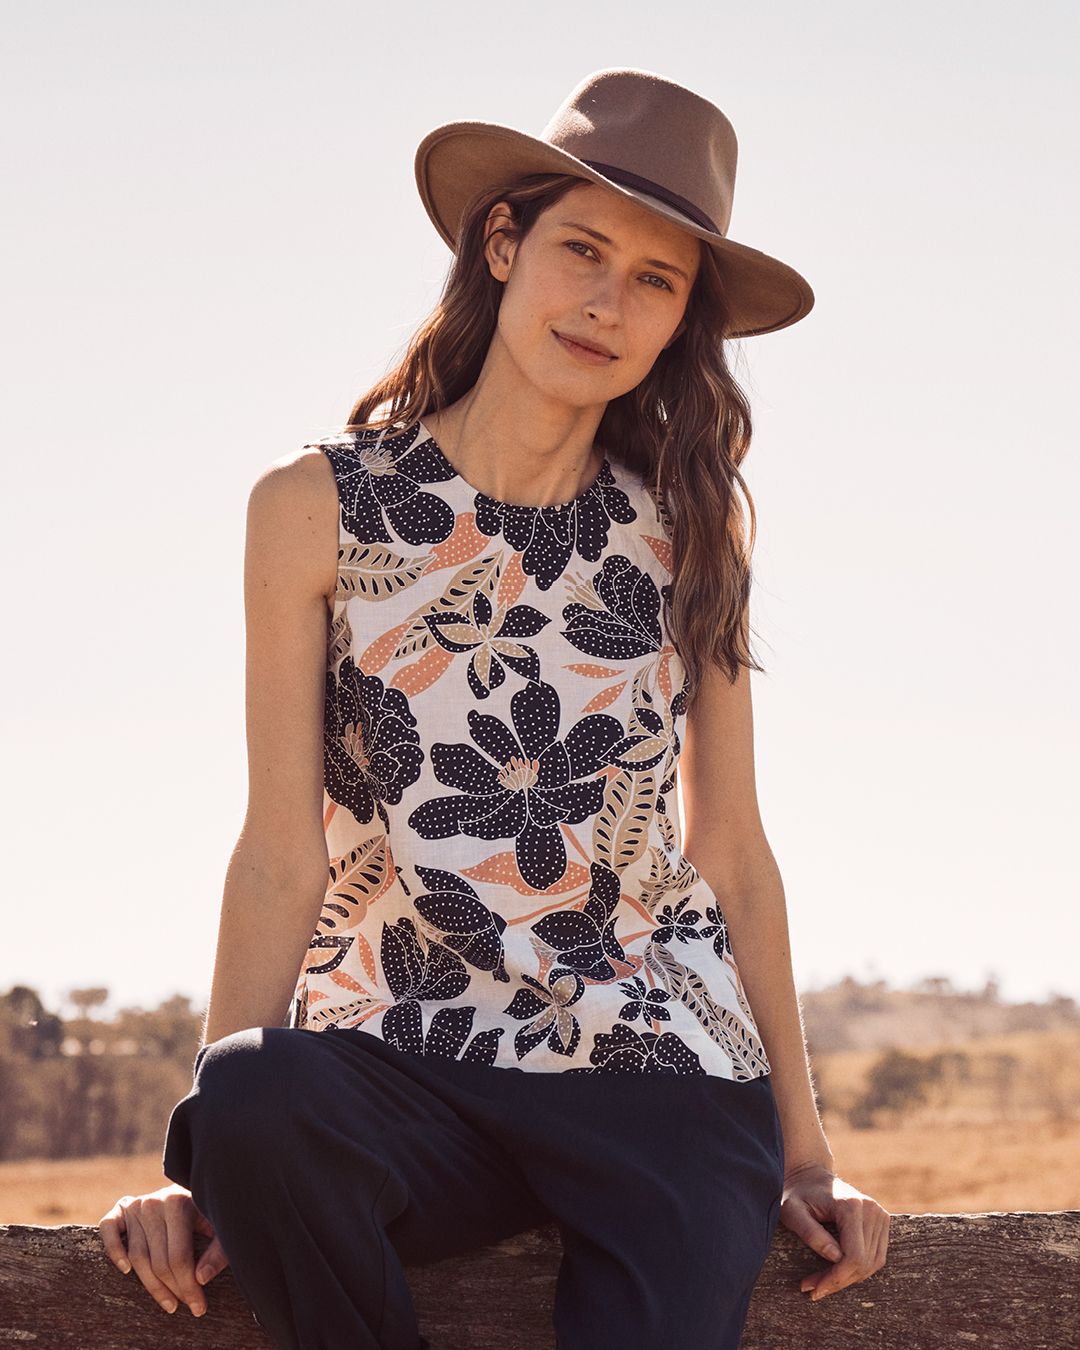 New Season | Dot Floral Top

A must for linen lovers, our Dot Floral ...

Shop All Women's New Arrivals via the link in bio. 

#RBSellars